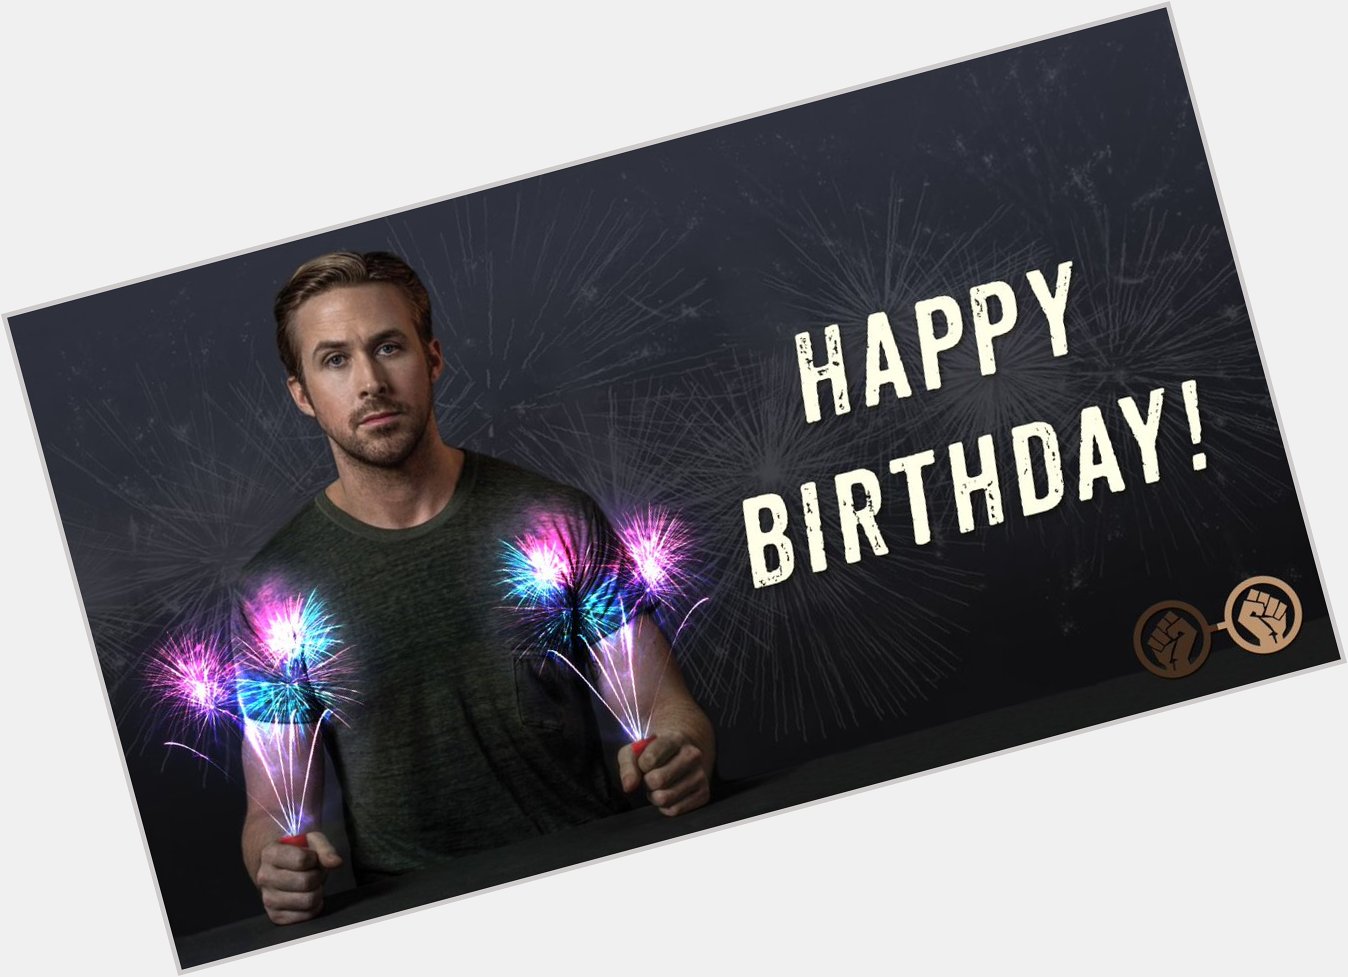 Happy Birthday, Ryan Gosling! The incredibly talented Canadian actor turns 37 today! 